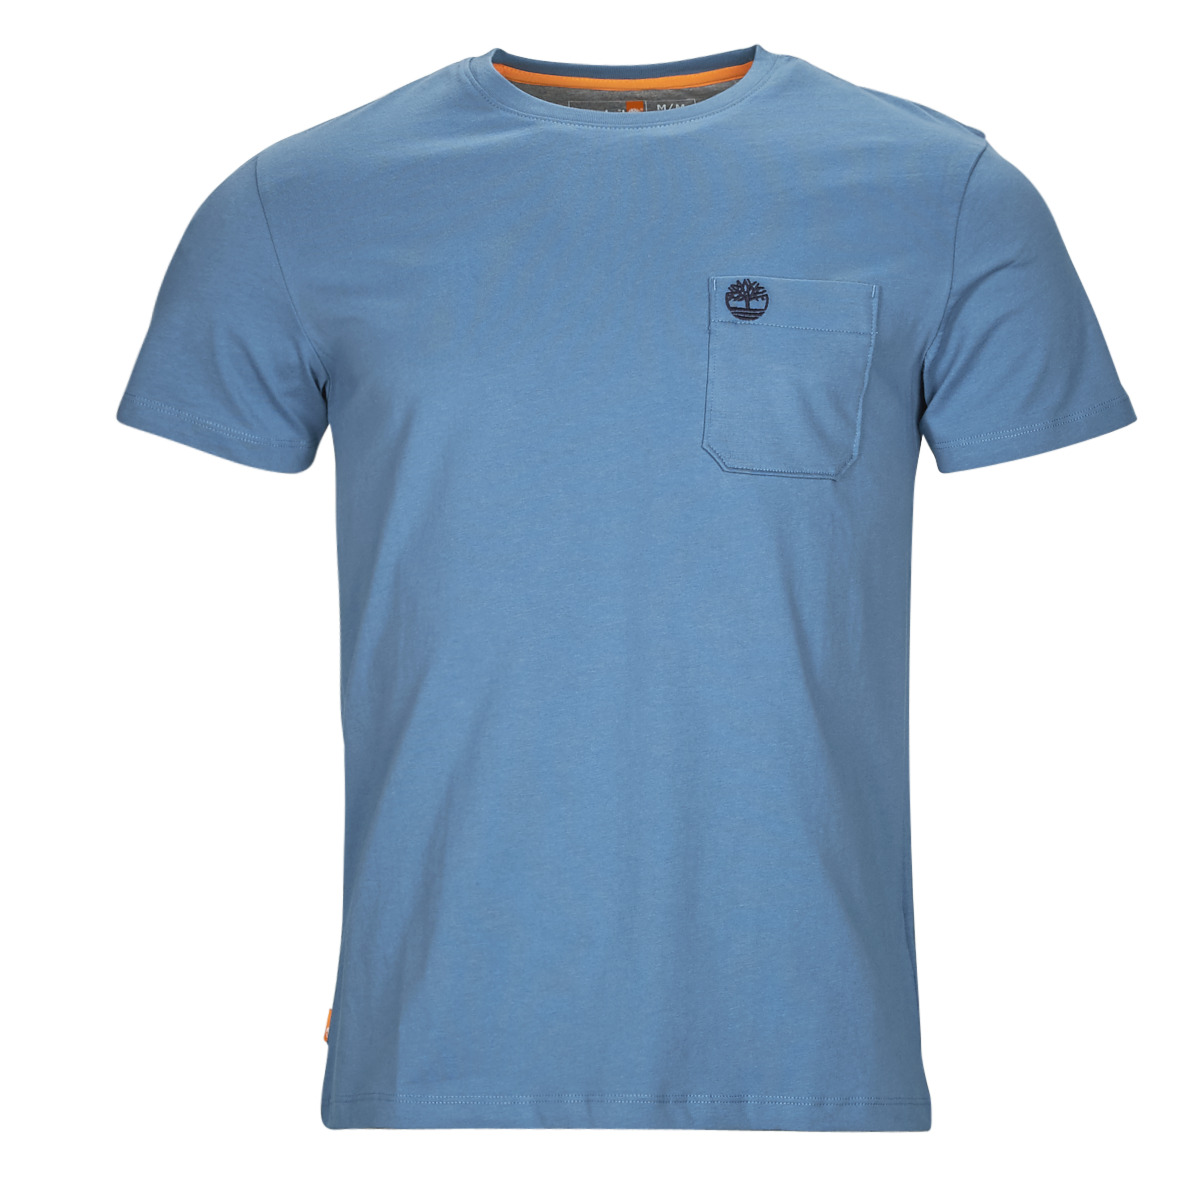 Timberland SS Dunstan River Pocket Tee Slim Blue - Free delivery | Spartoo  NET ! - Clothing short-sleeved t-shirts Men